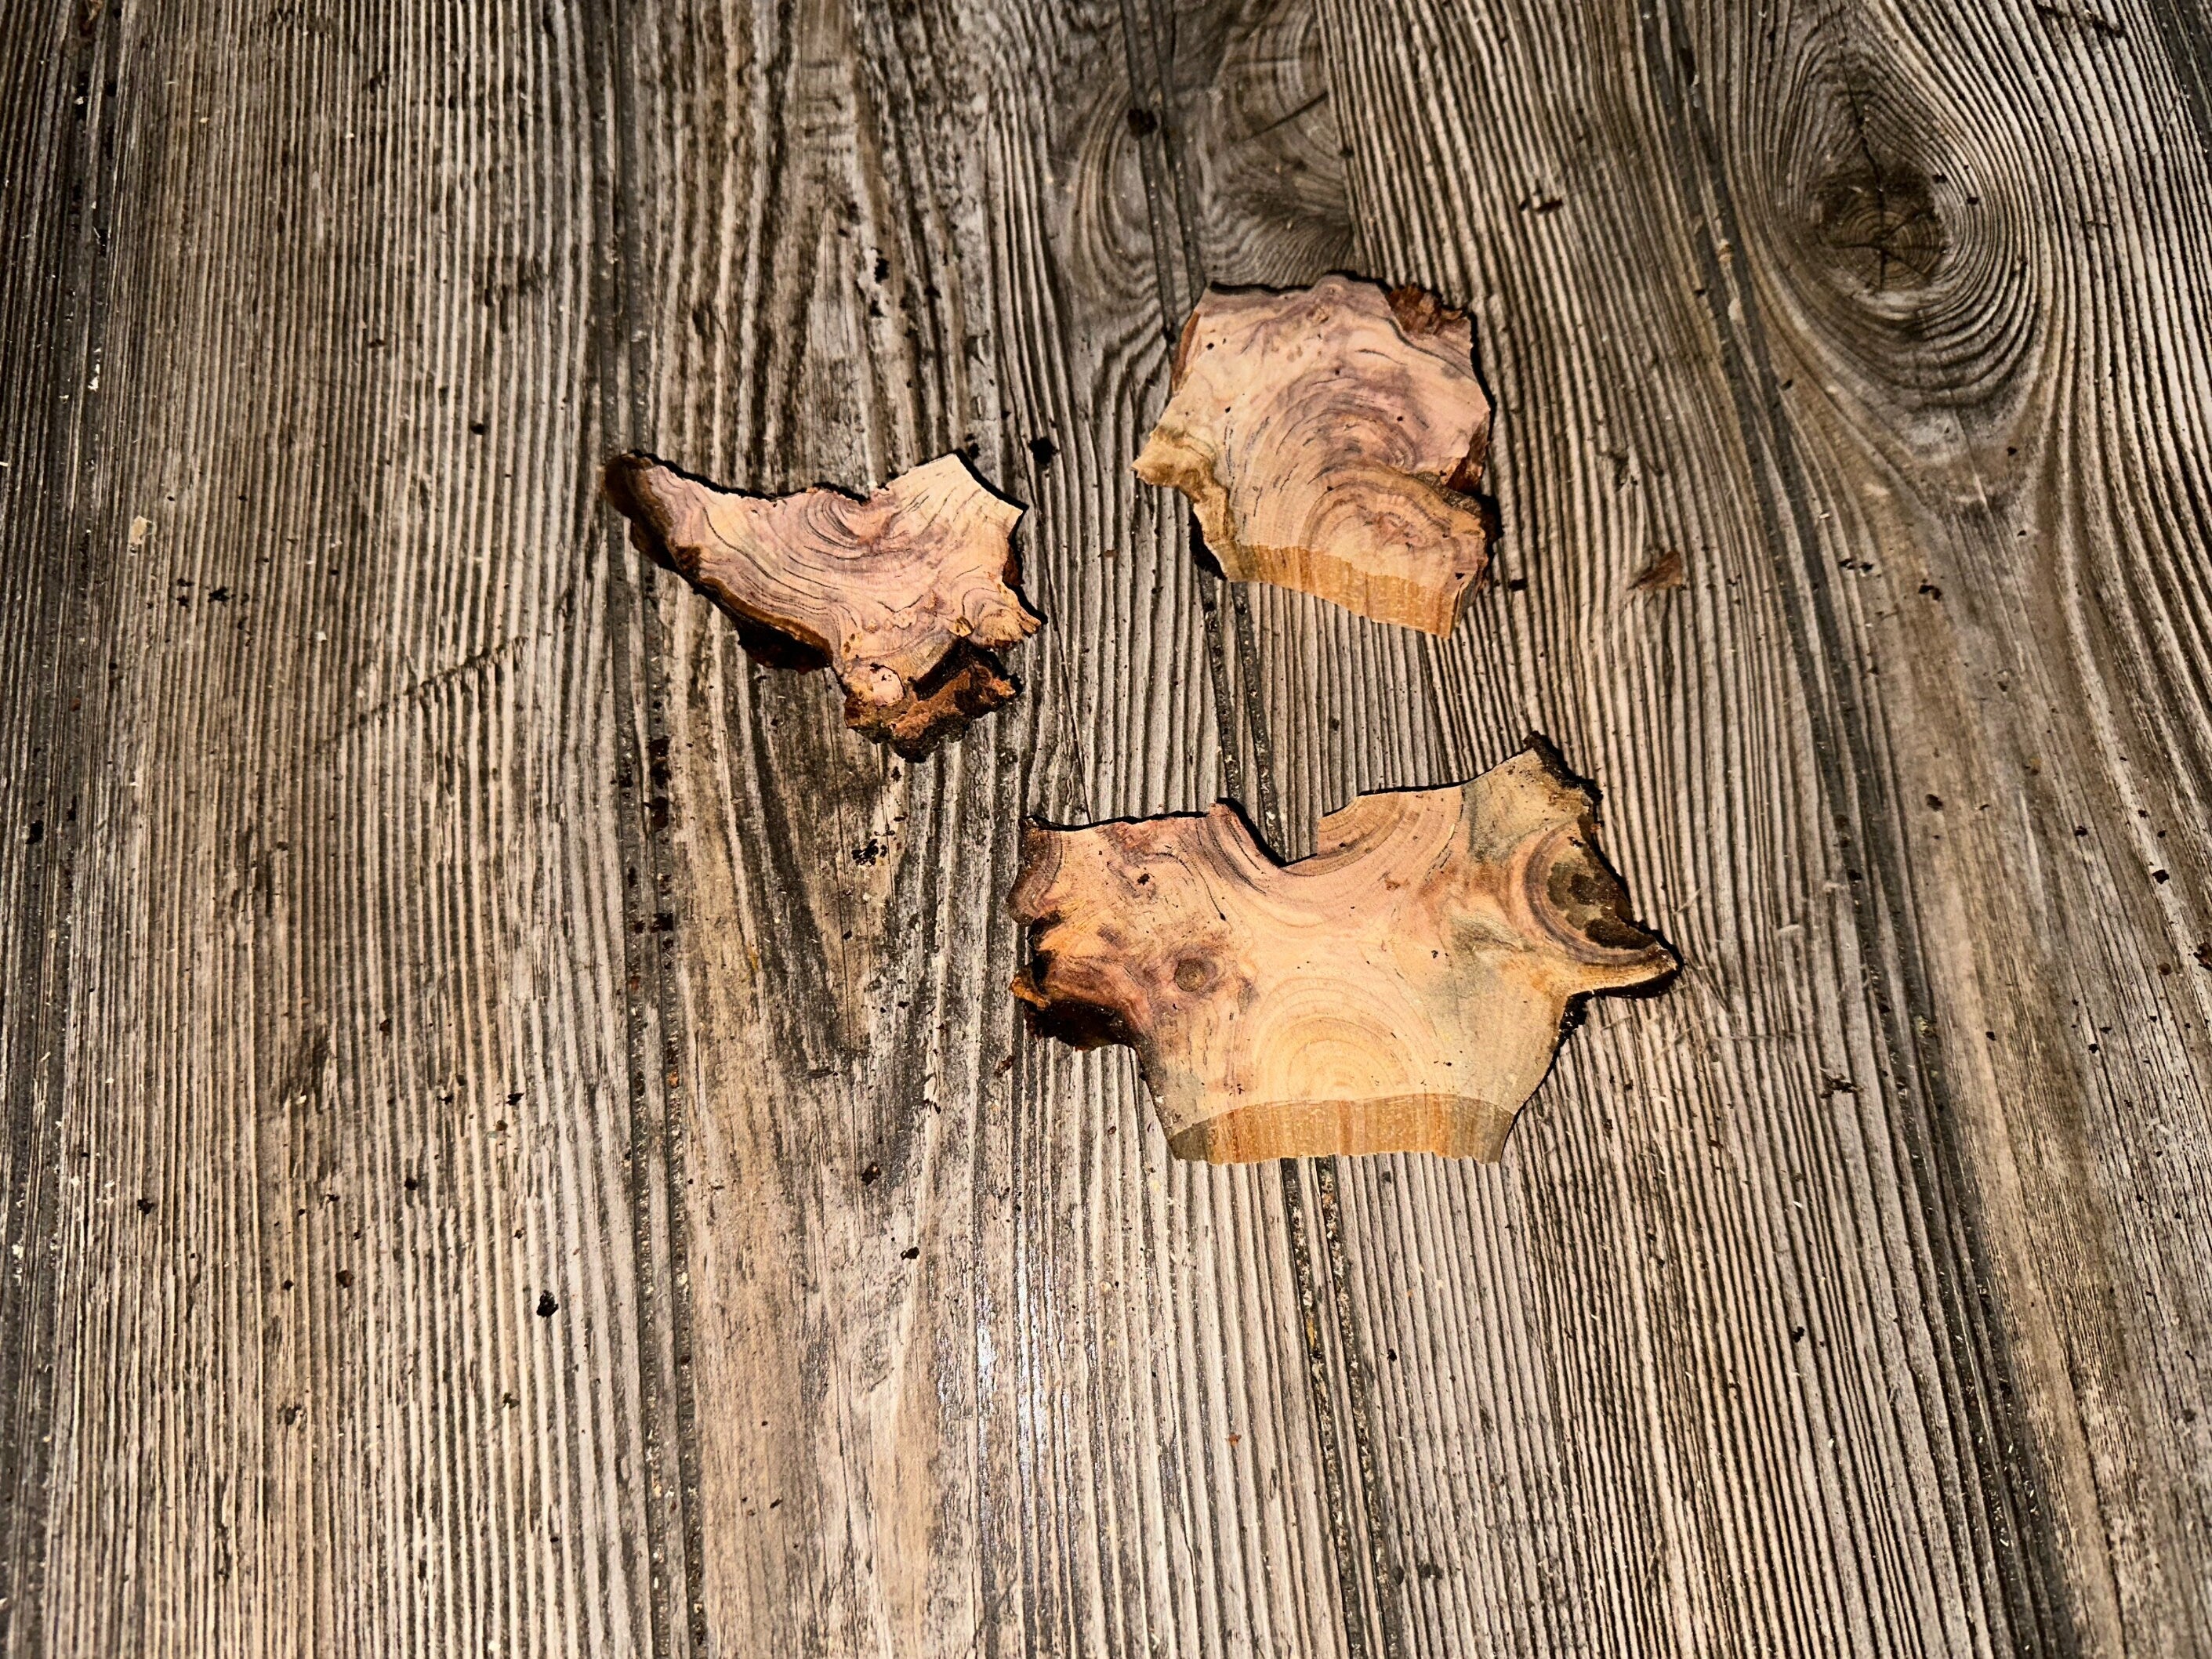 Three Shattered Cherry Burl Slices, Approximately 3-4 Inches Long by 2 Inches Wide and 1/2 Inch Thick